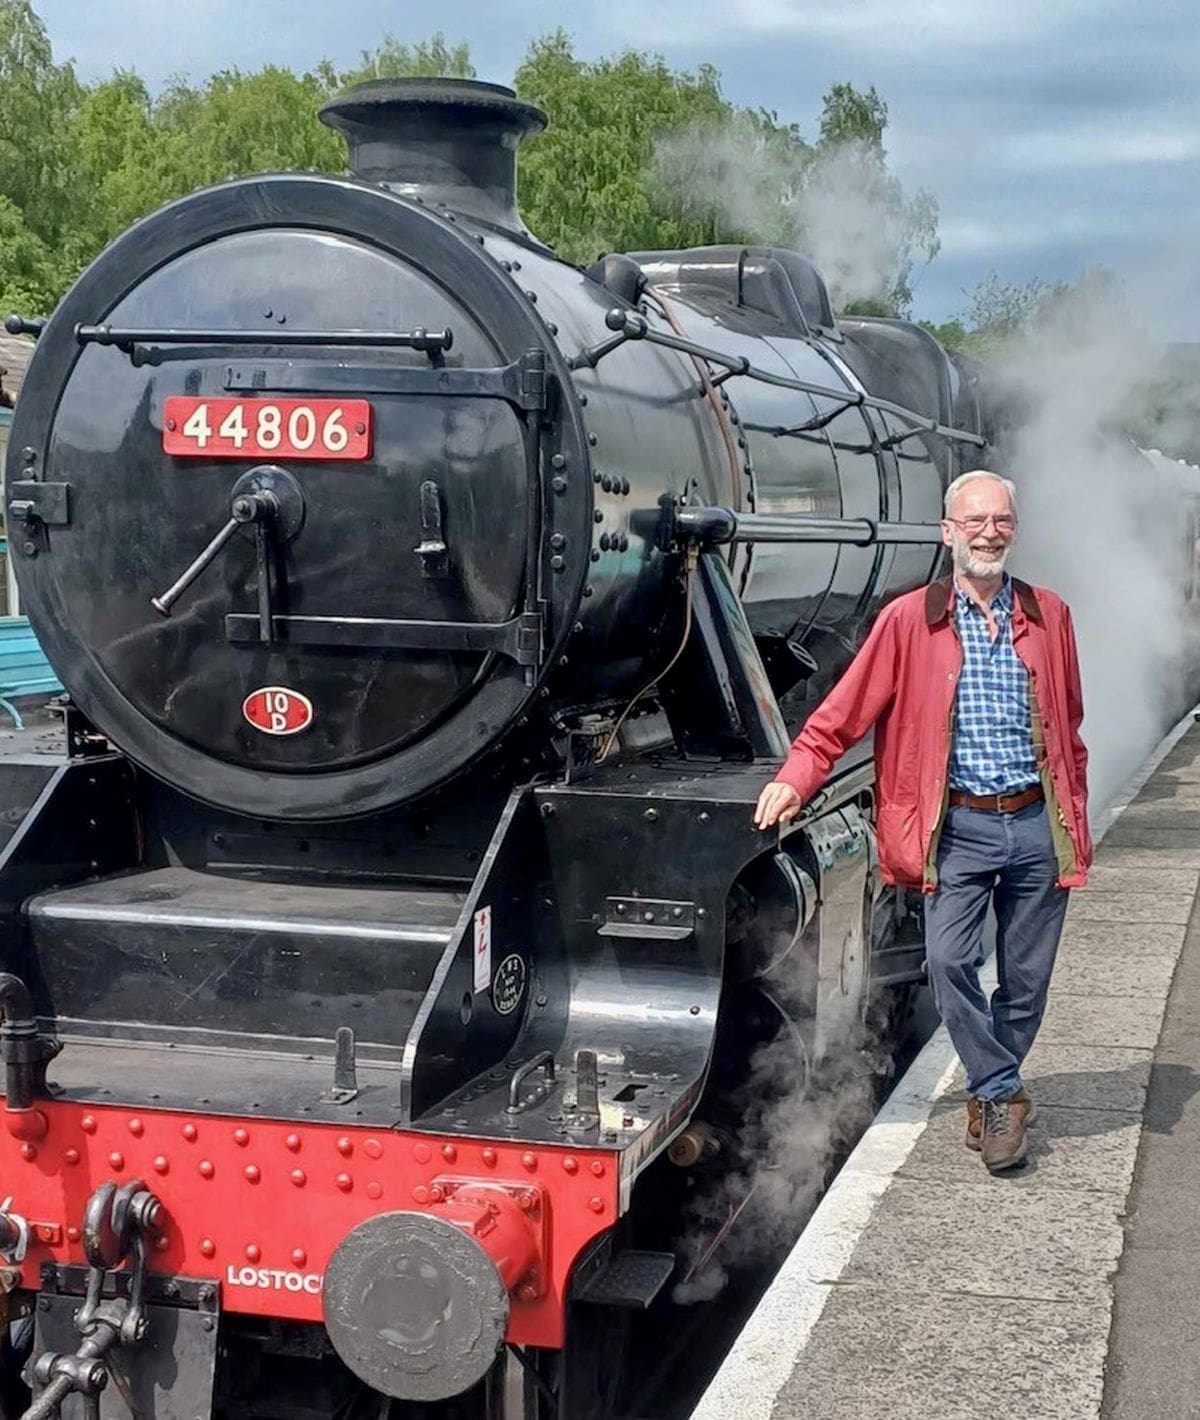 Train restoration enthusiast awarded BEM for service to steam and heritage railways